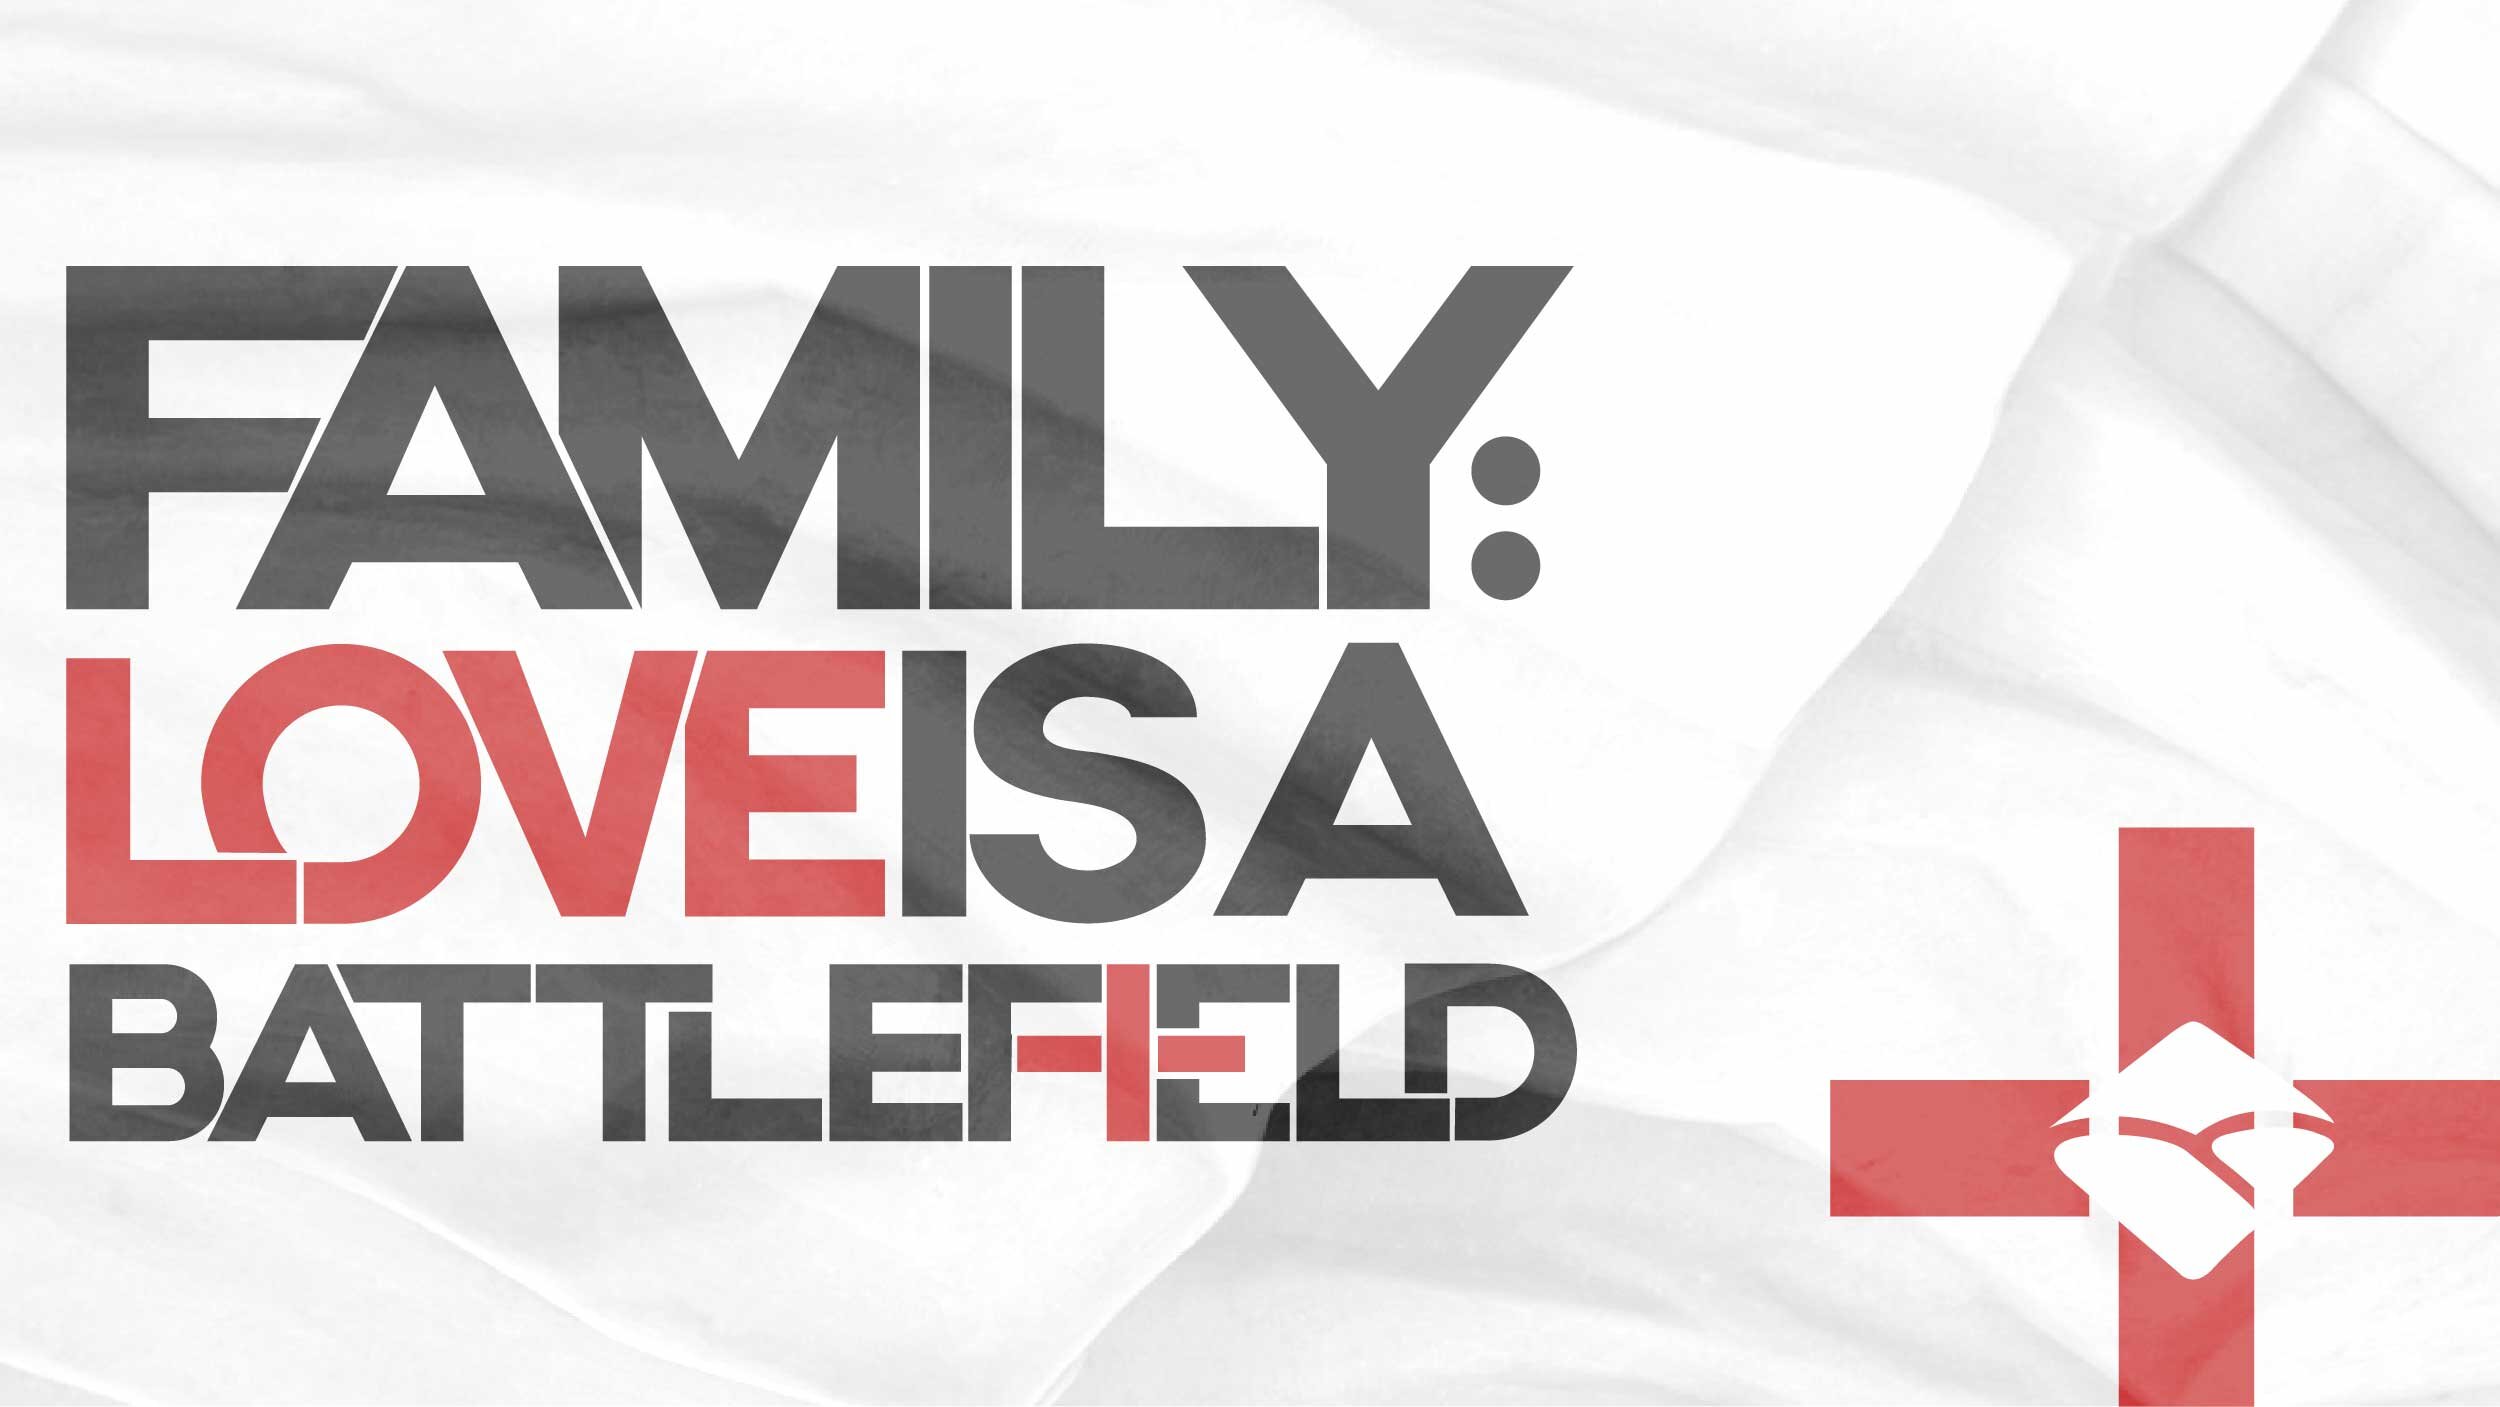 Cloth flows across the background. "Family: Love is a Battlefield" is superimposed